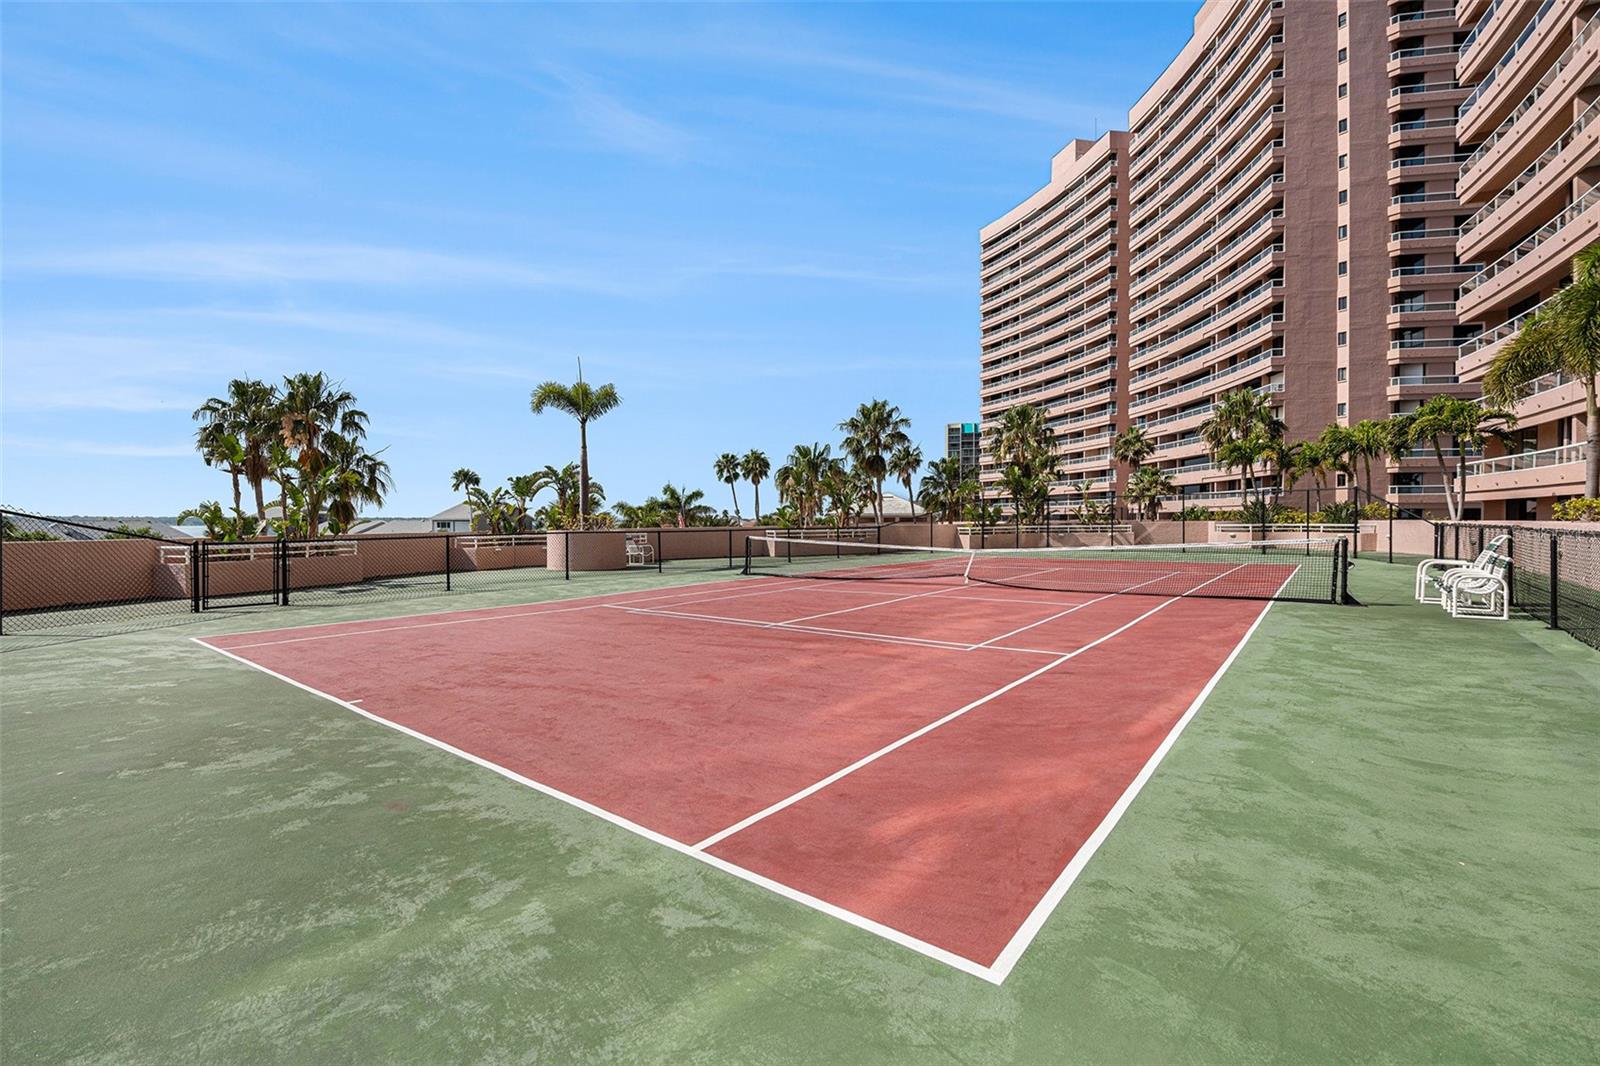 Tennis Courts located right out your front door